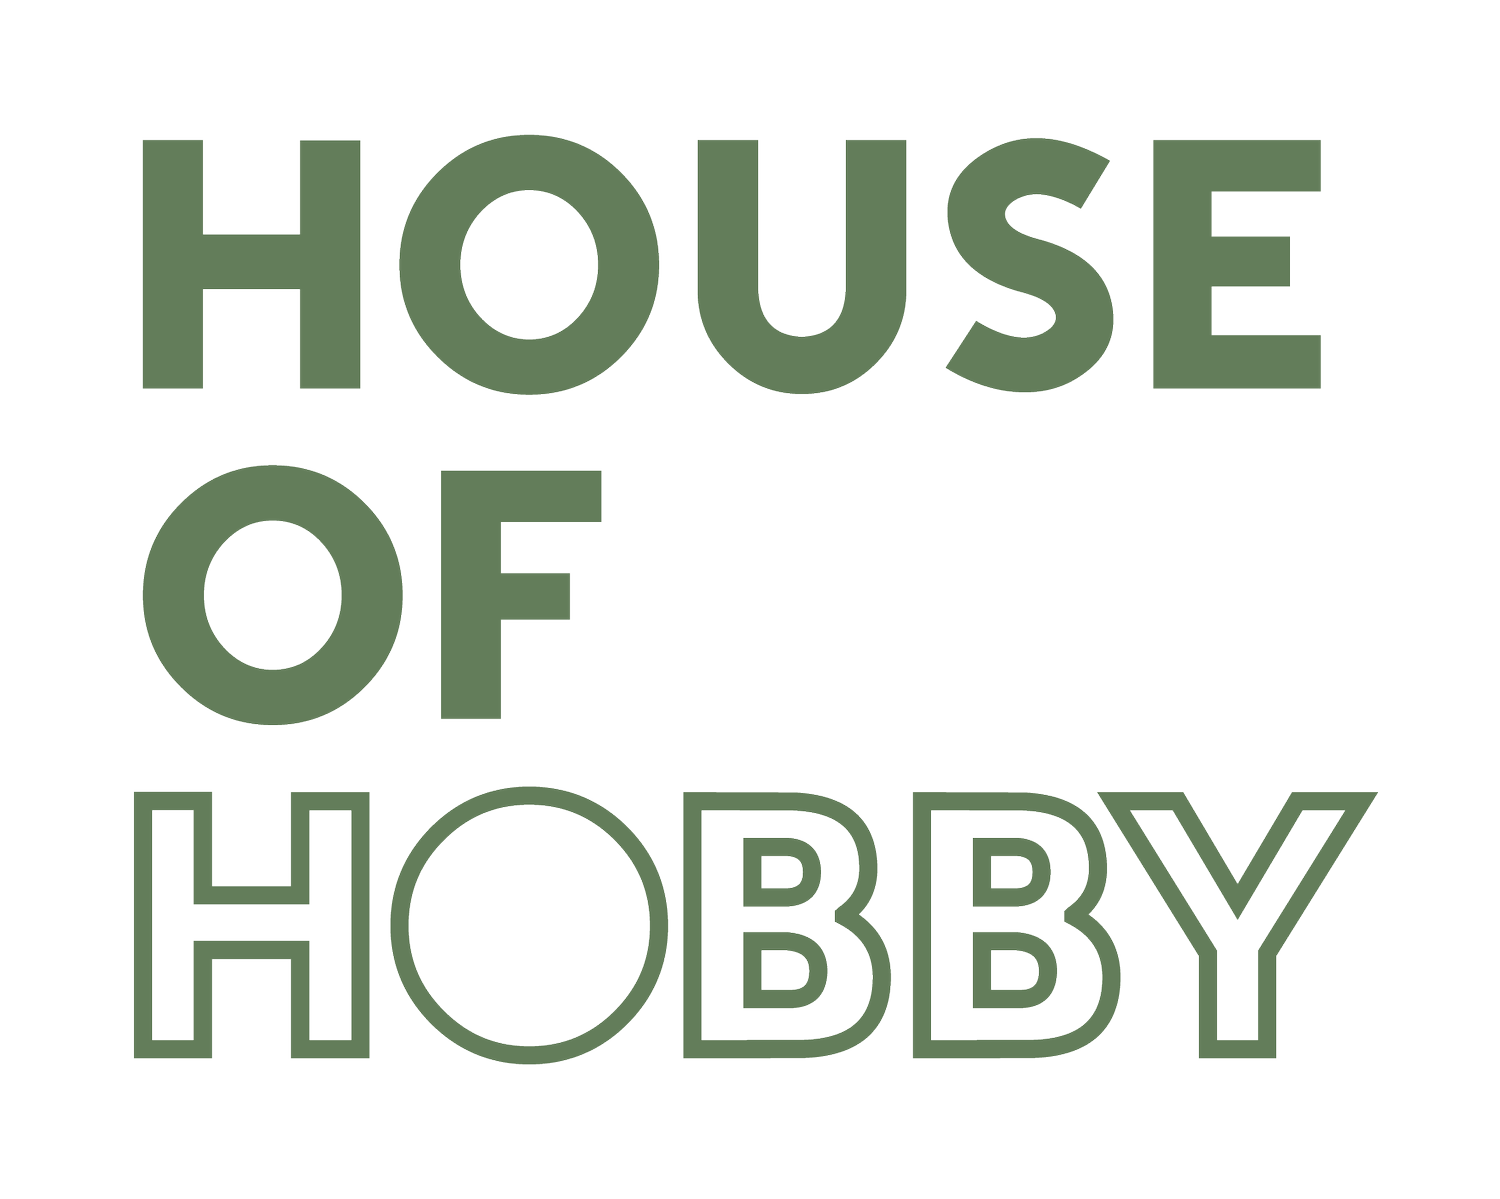 House of Hobby - Perth & Melbourne Workshops